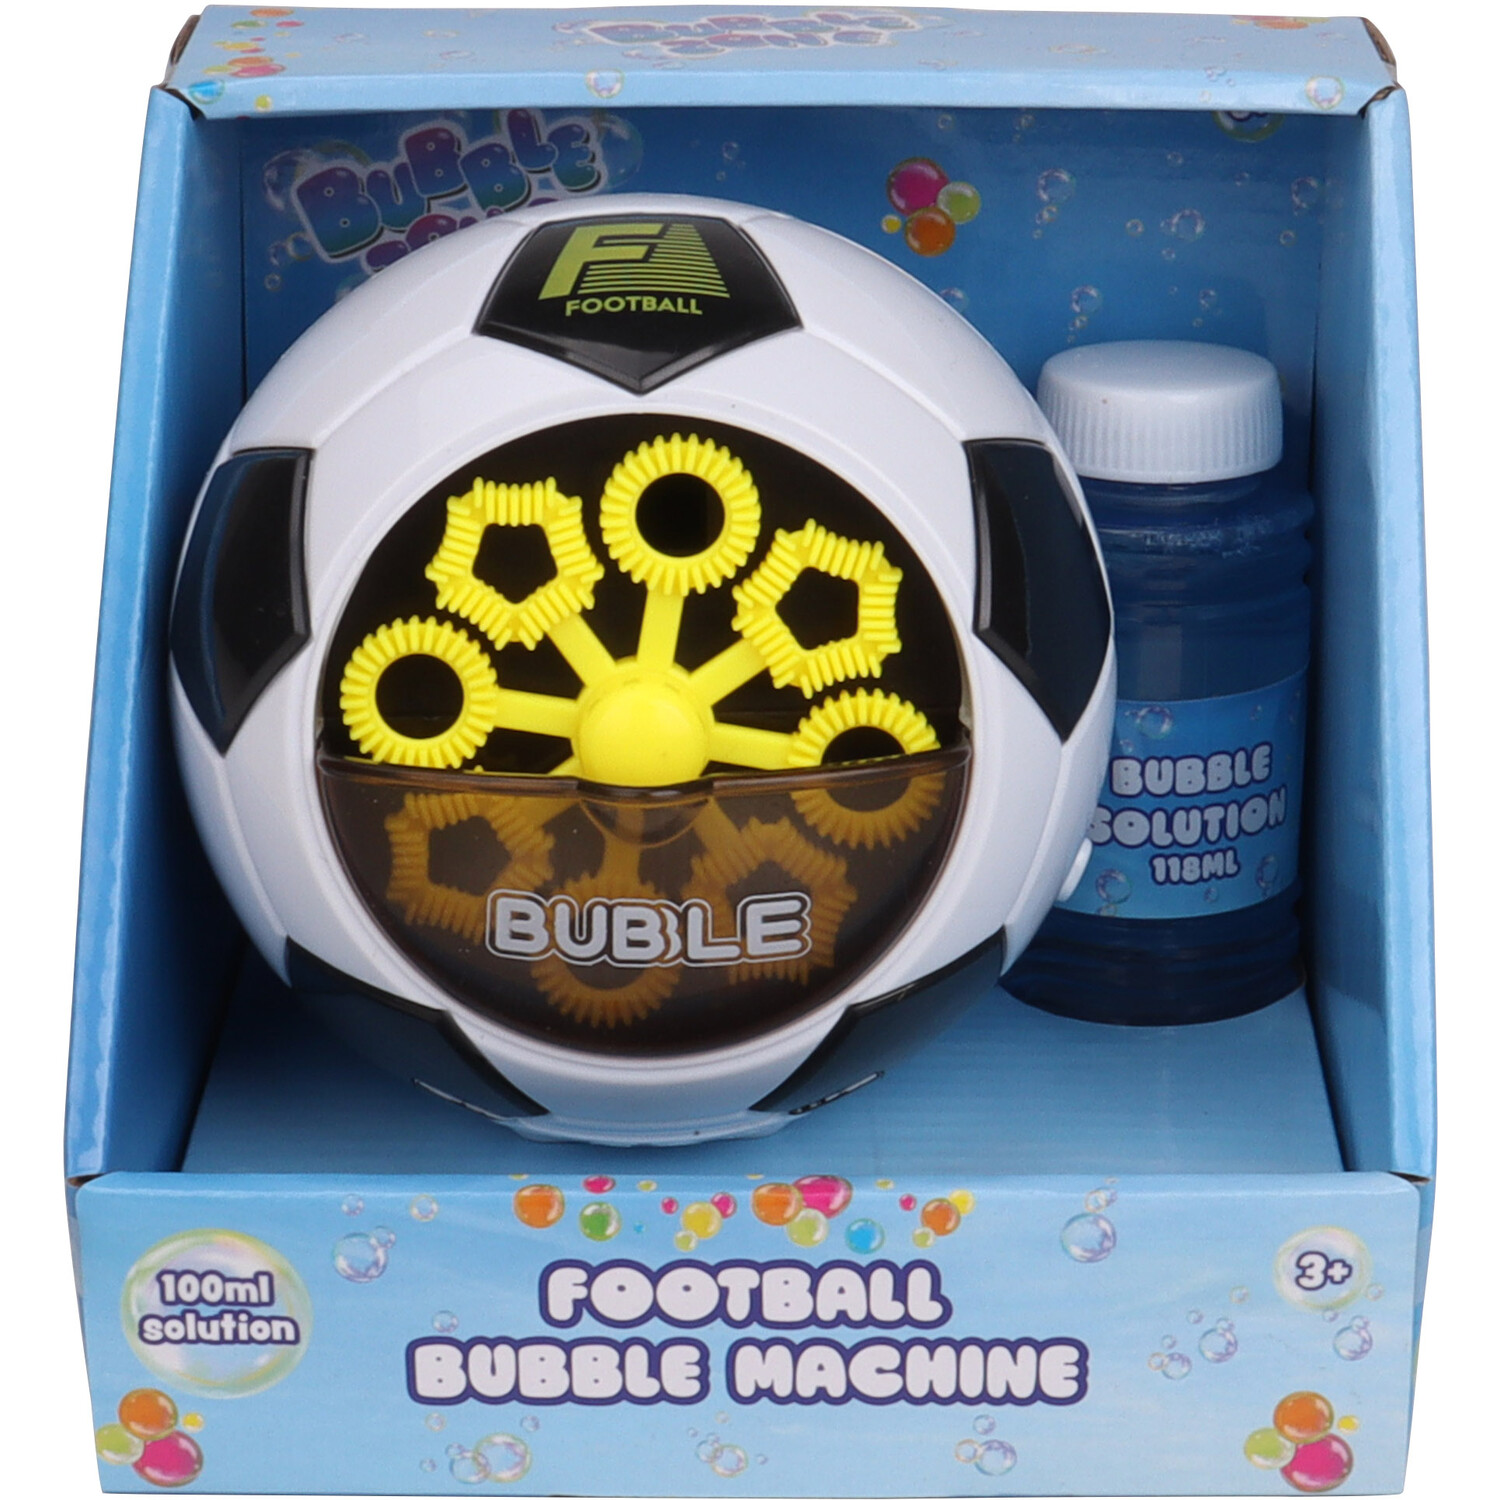 Football Bubble Machine and Solution - White Image 1